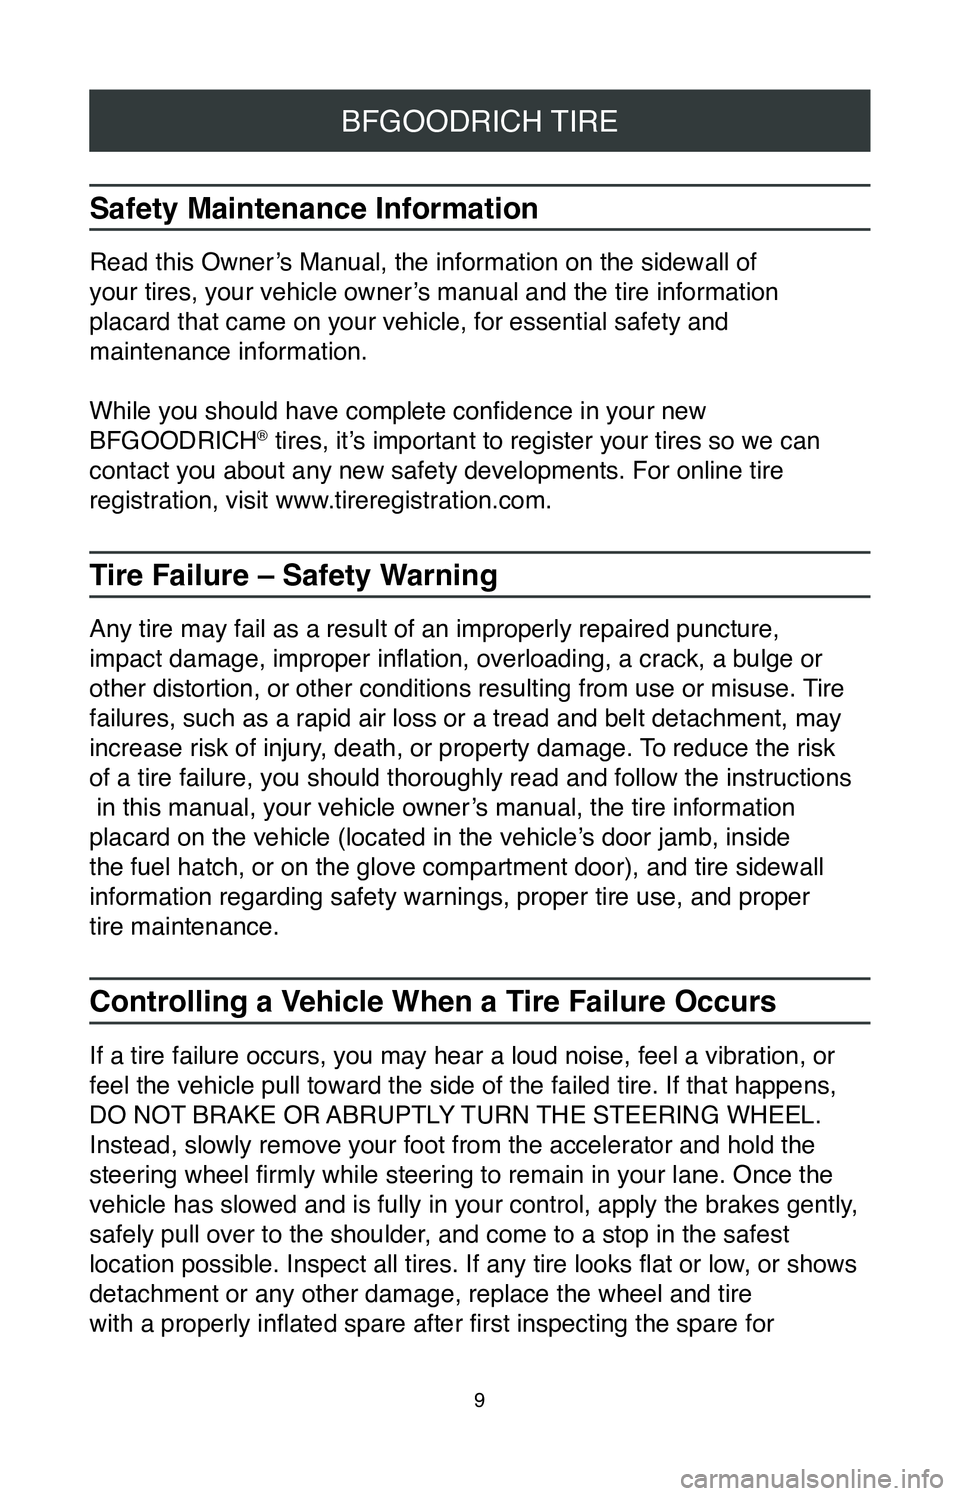 TOYOTA MIRAI 2020  Warranties & Maintenance Guides (in English) 9
BFGOODRICH TIRE
Safety Maintenance Information
Read this Owner’s Manual, the information on the sidewall of  
your tires, your vehicle owner’s manual and the tire information   
placard that cam